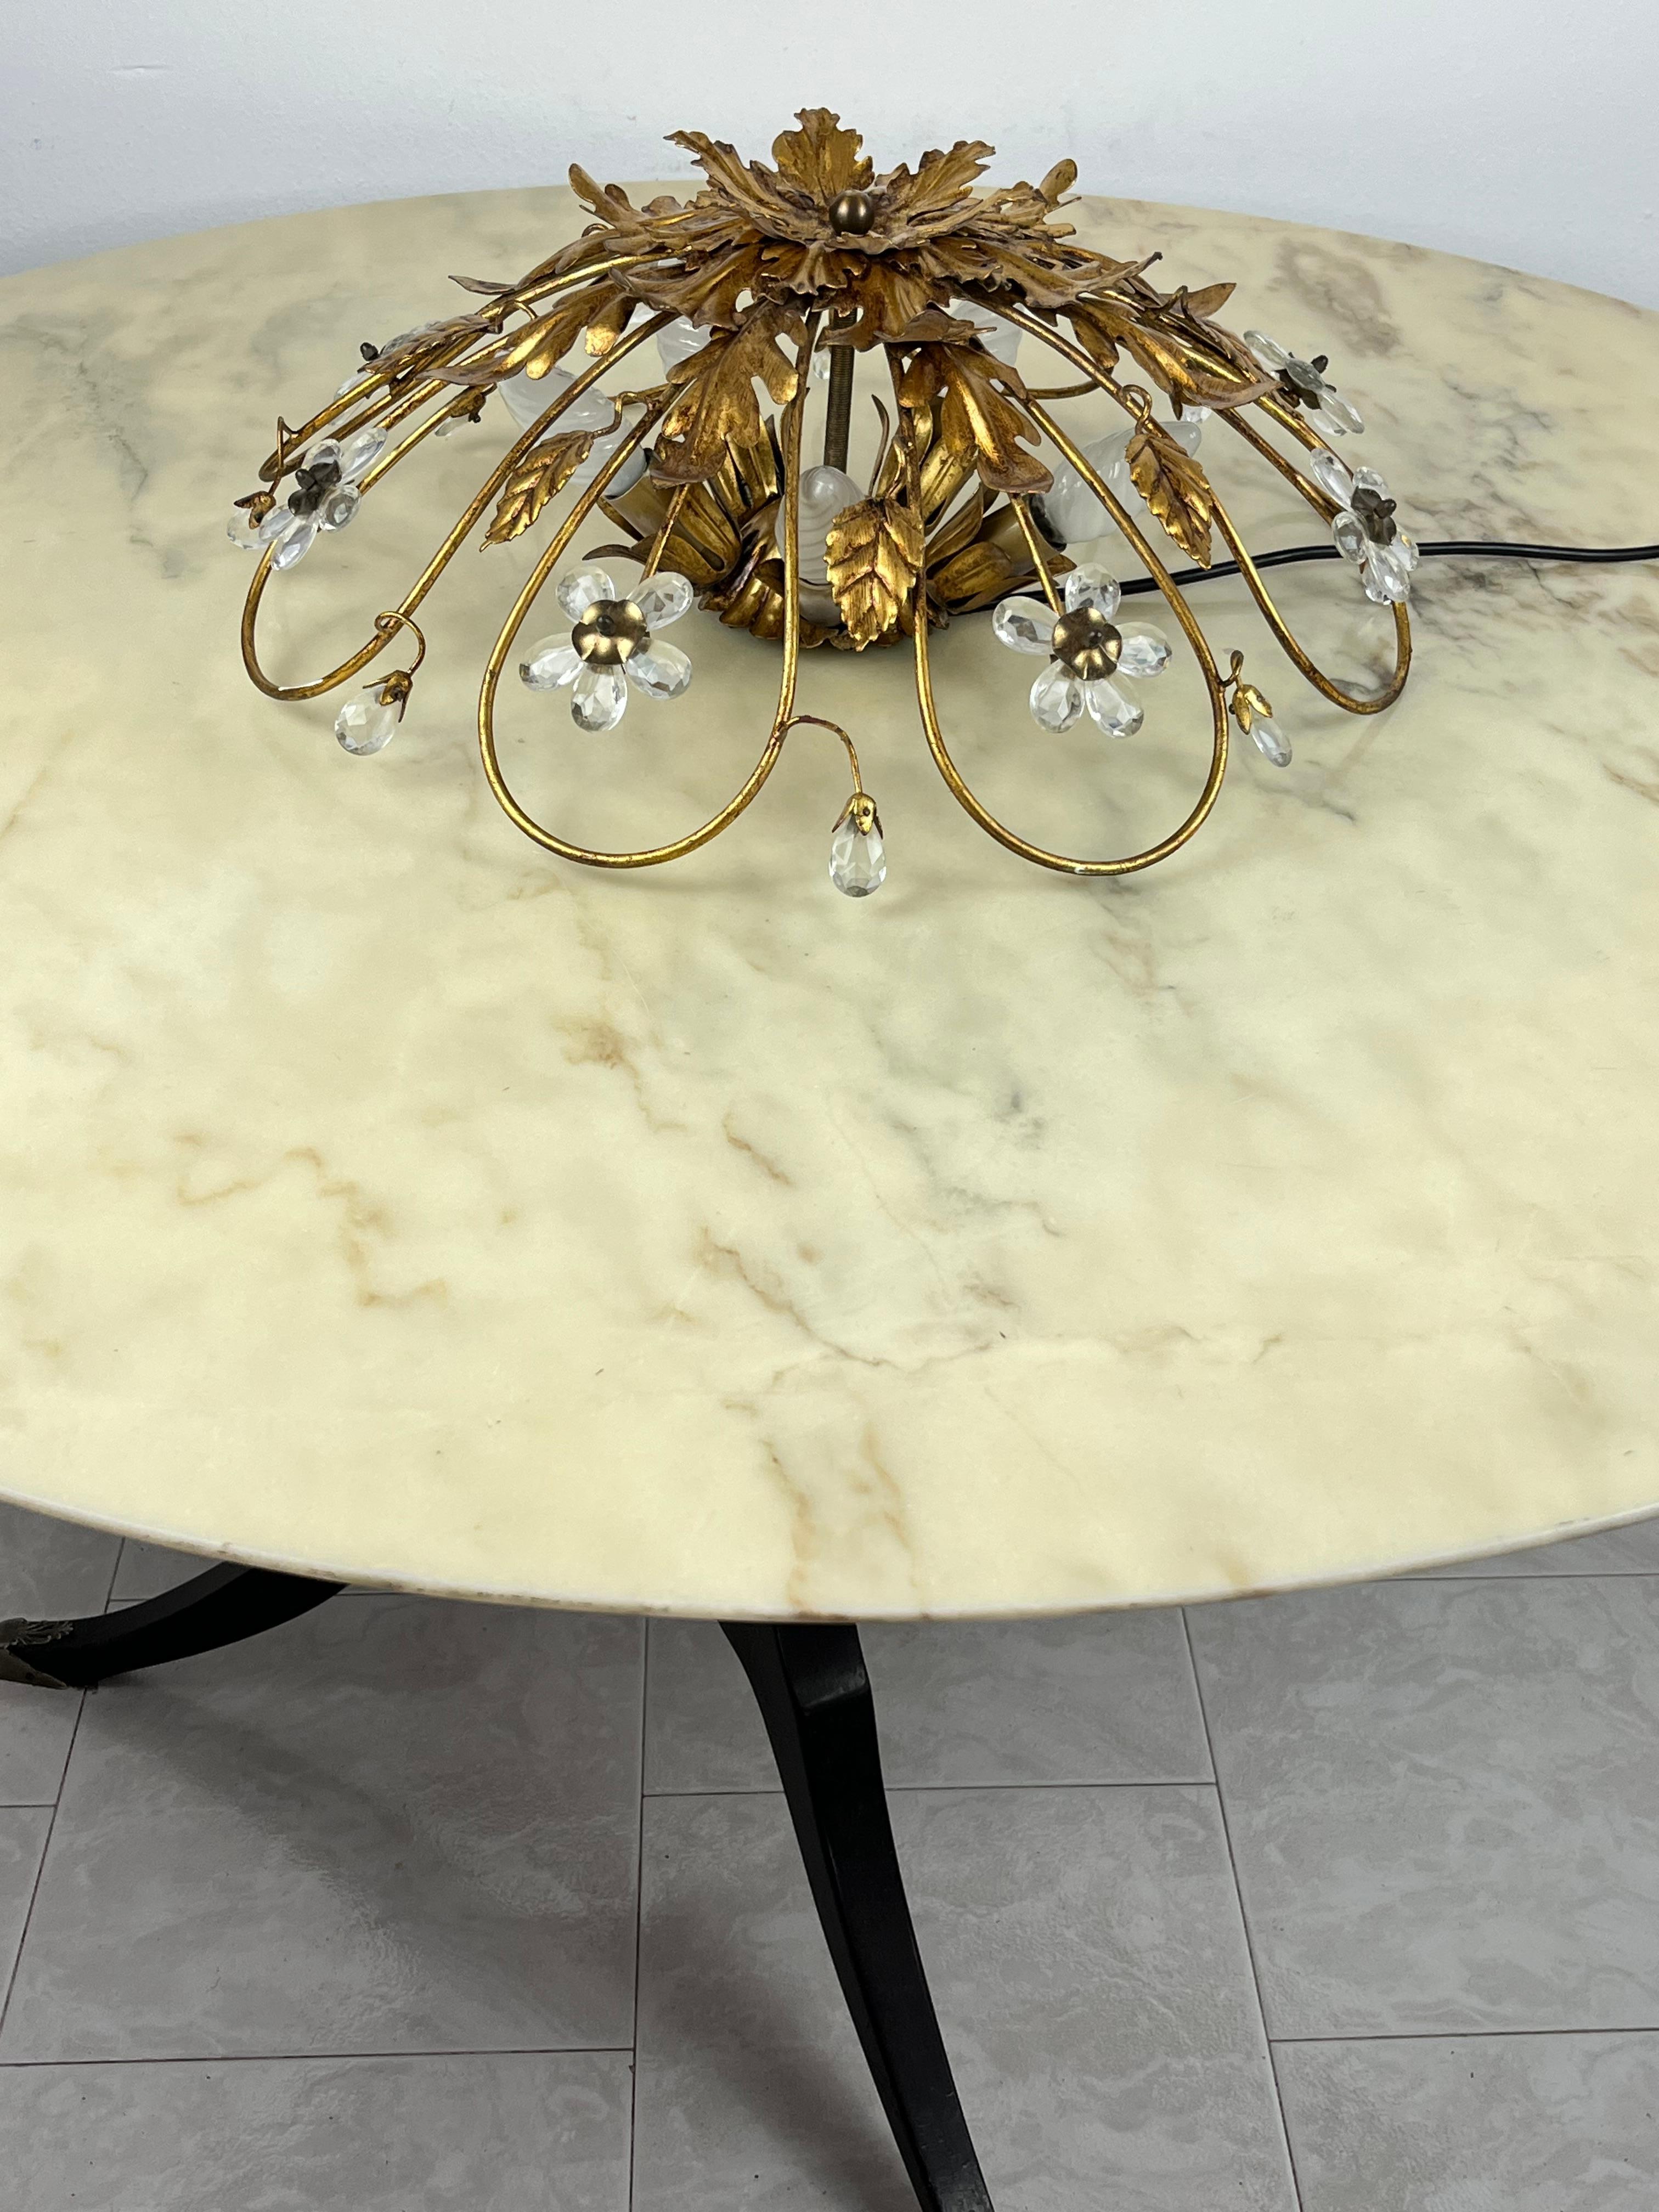 Banci Ceiling Light in Gilded Iron and Crystal Flowers Italian Design 1980s For Sale 2